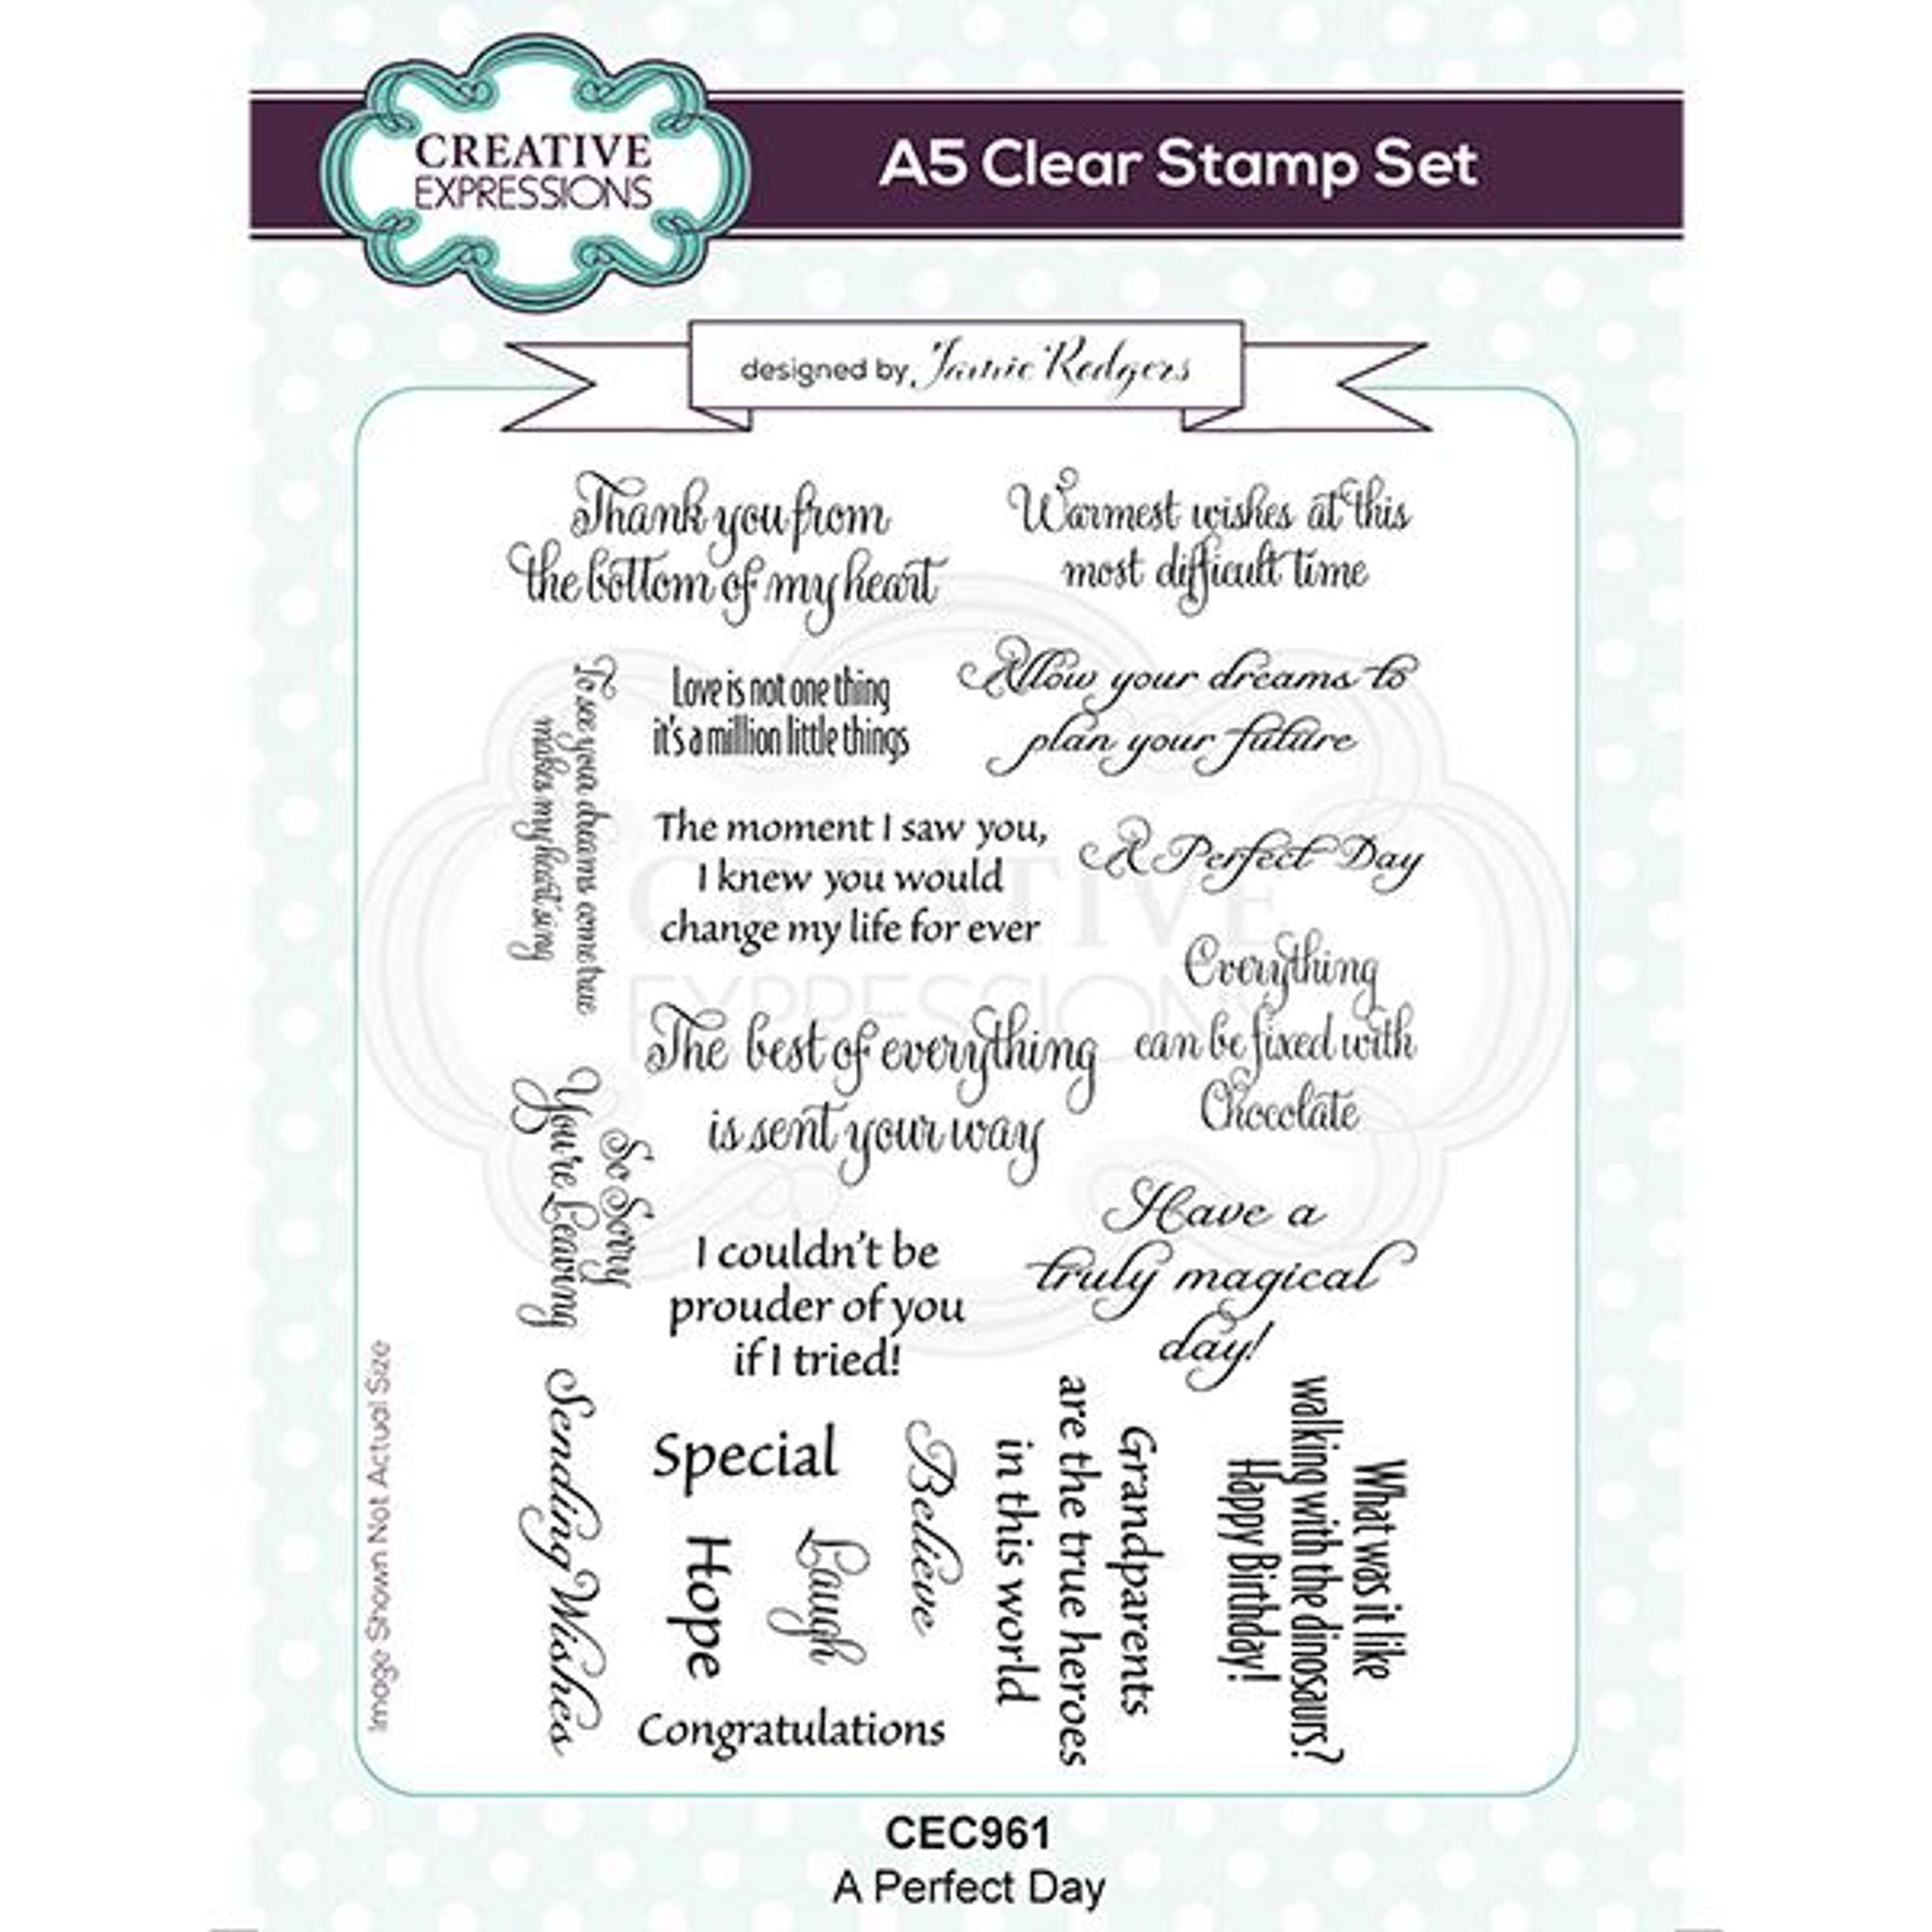 Jamie Rodgers A Perfect Day A5 Clear Stamp Set